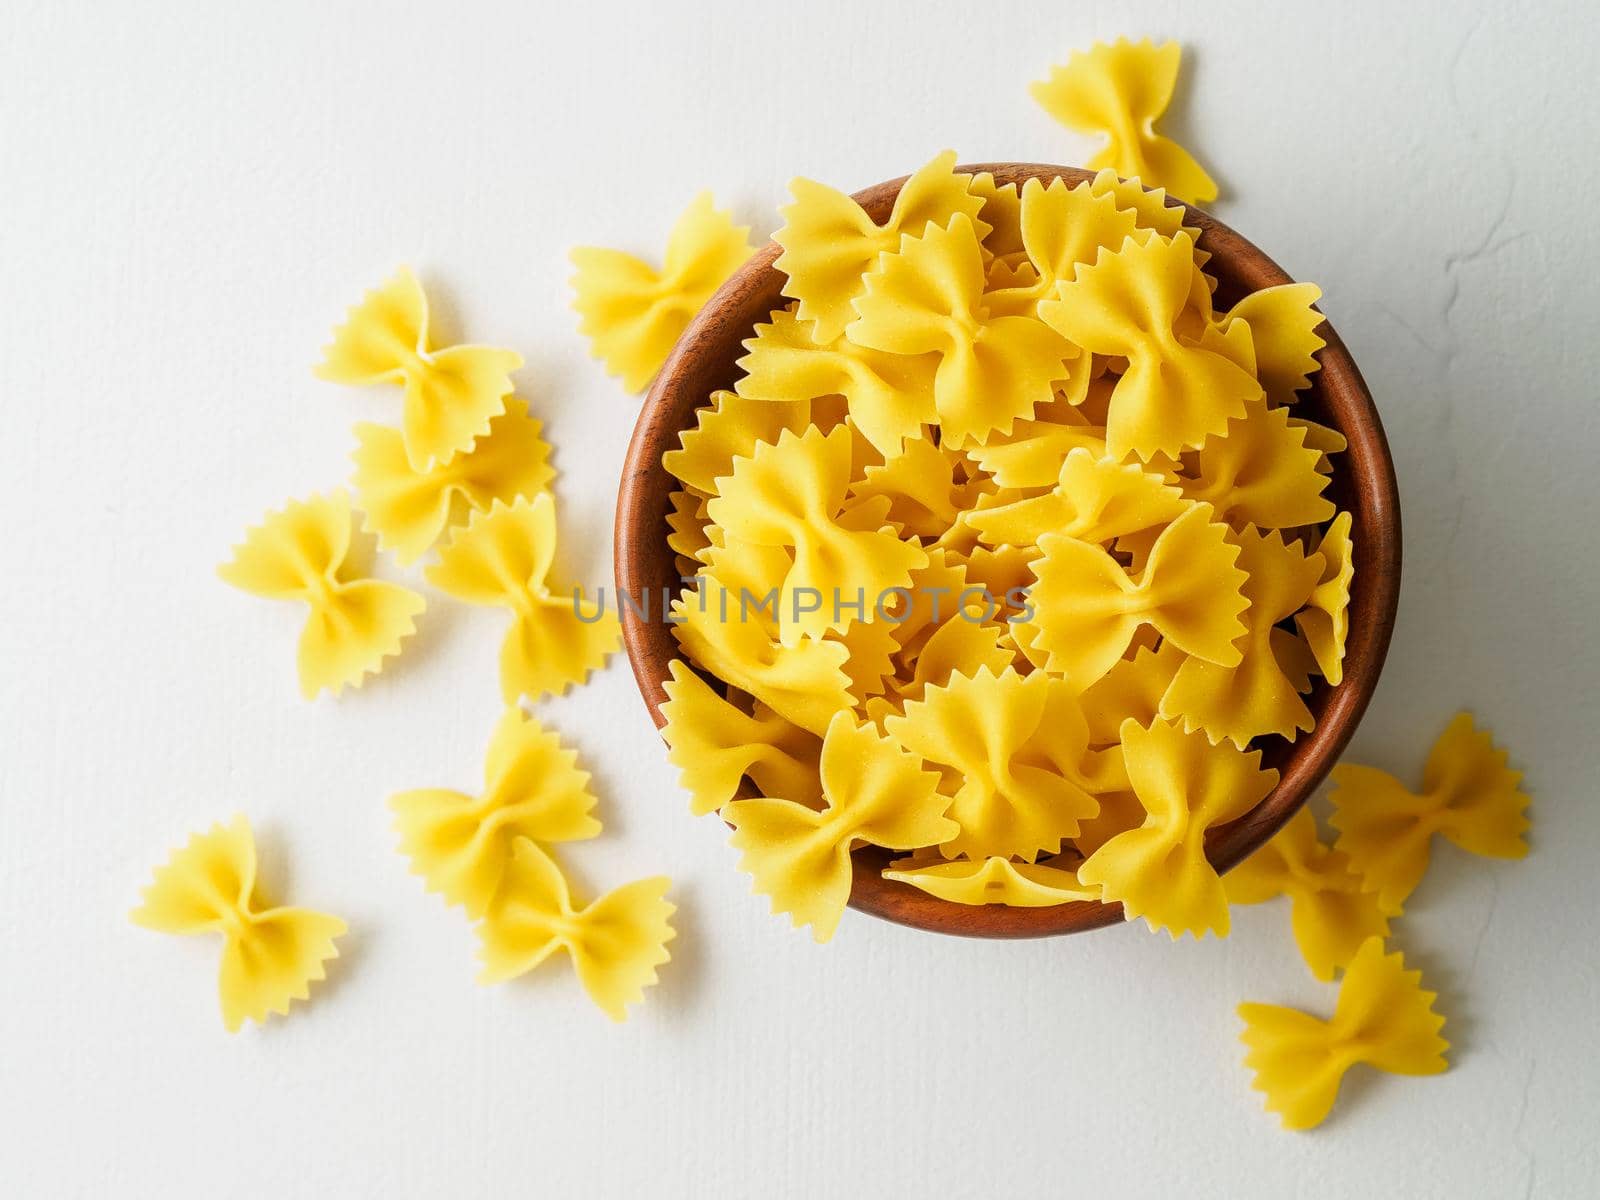 Pasta farfalle in wooden bowl on gray stone table. Top view, close up